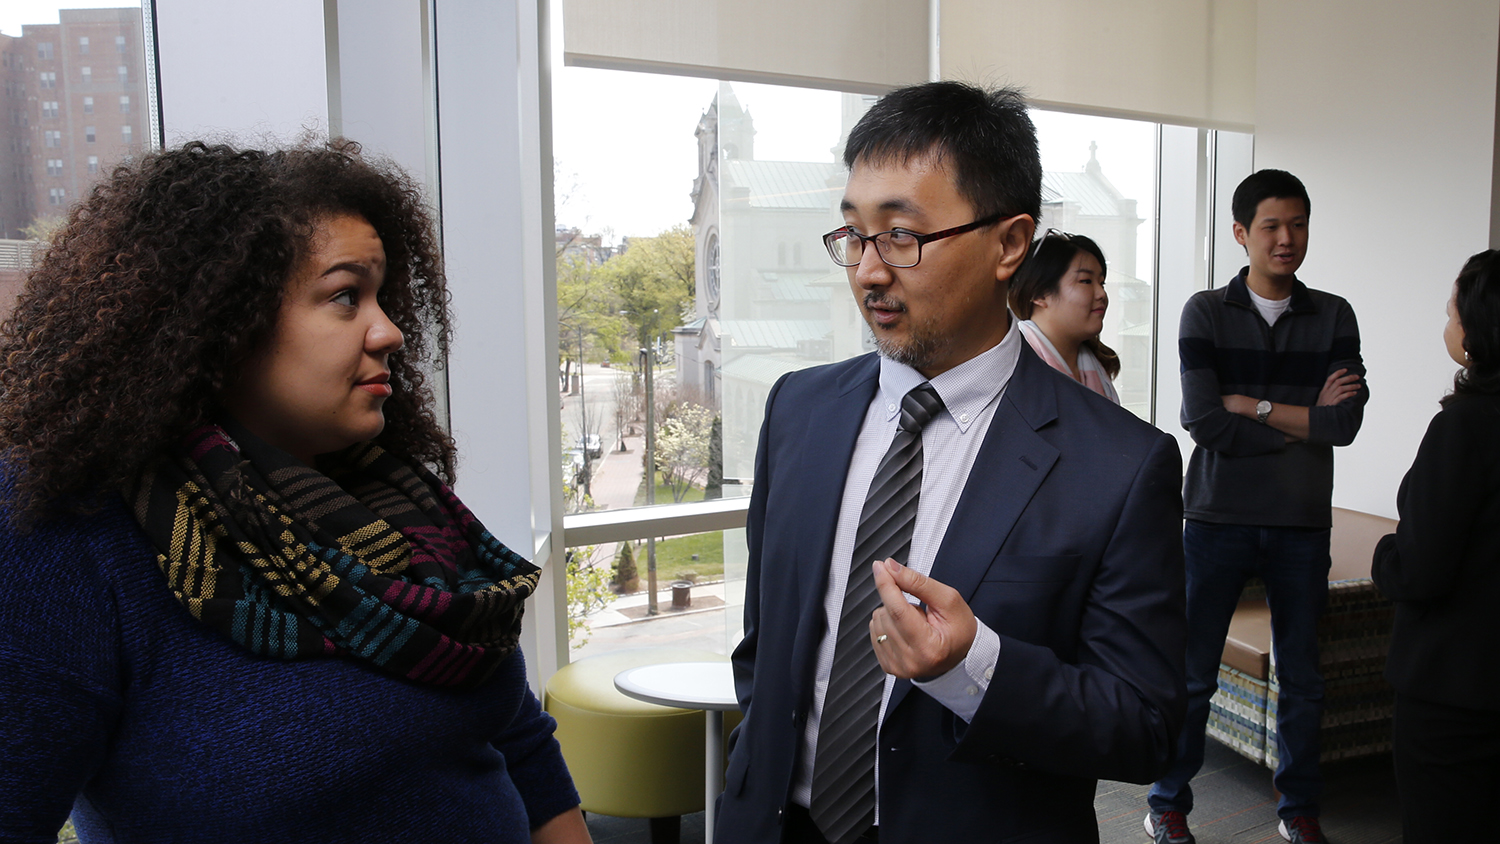 The new GVPA 100 undergraduate course is instructed by Myung Jin (at right), associate professor and chair of the Master of Public Administration program.